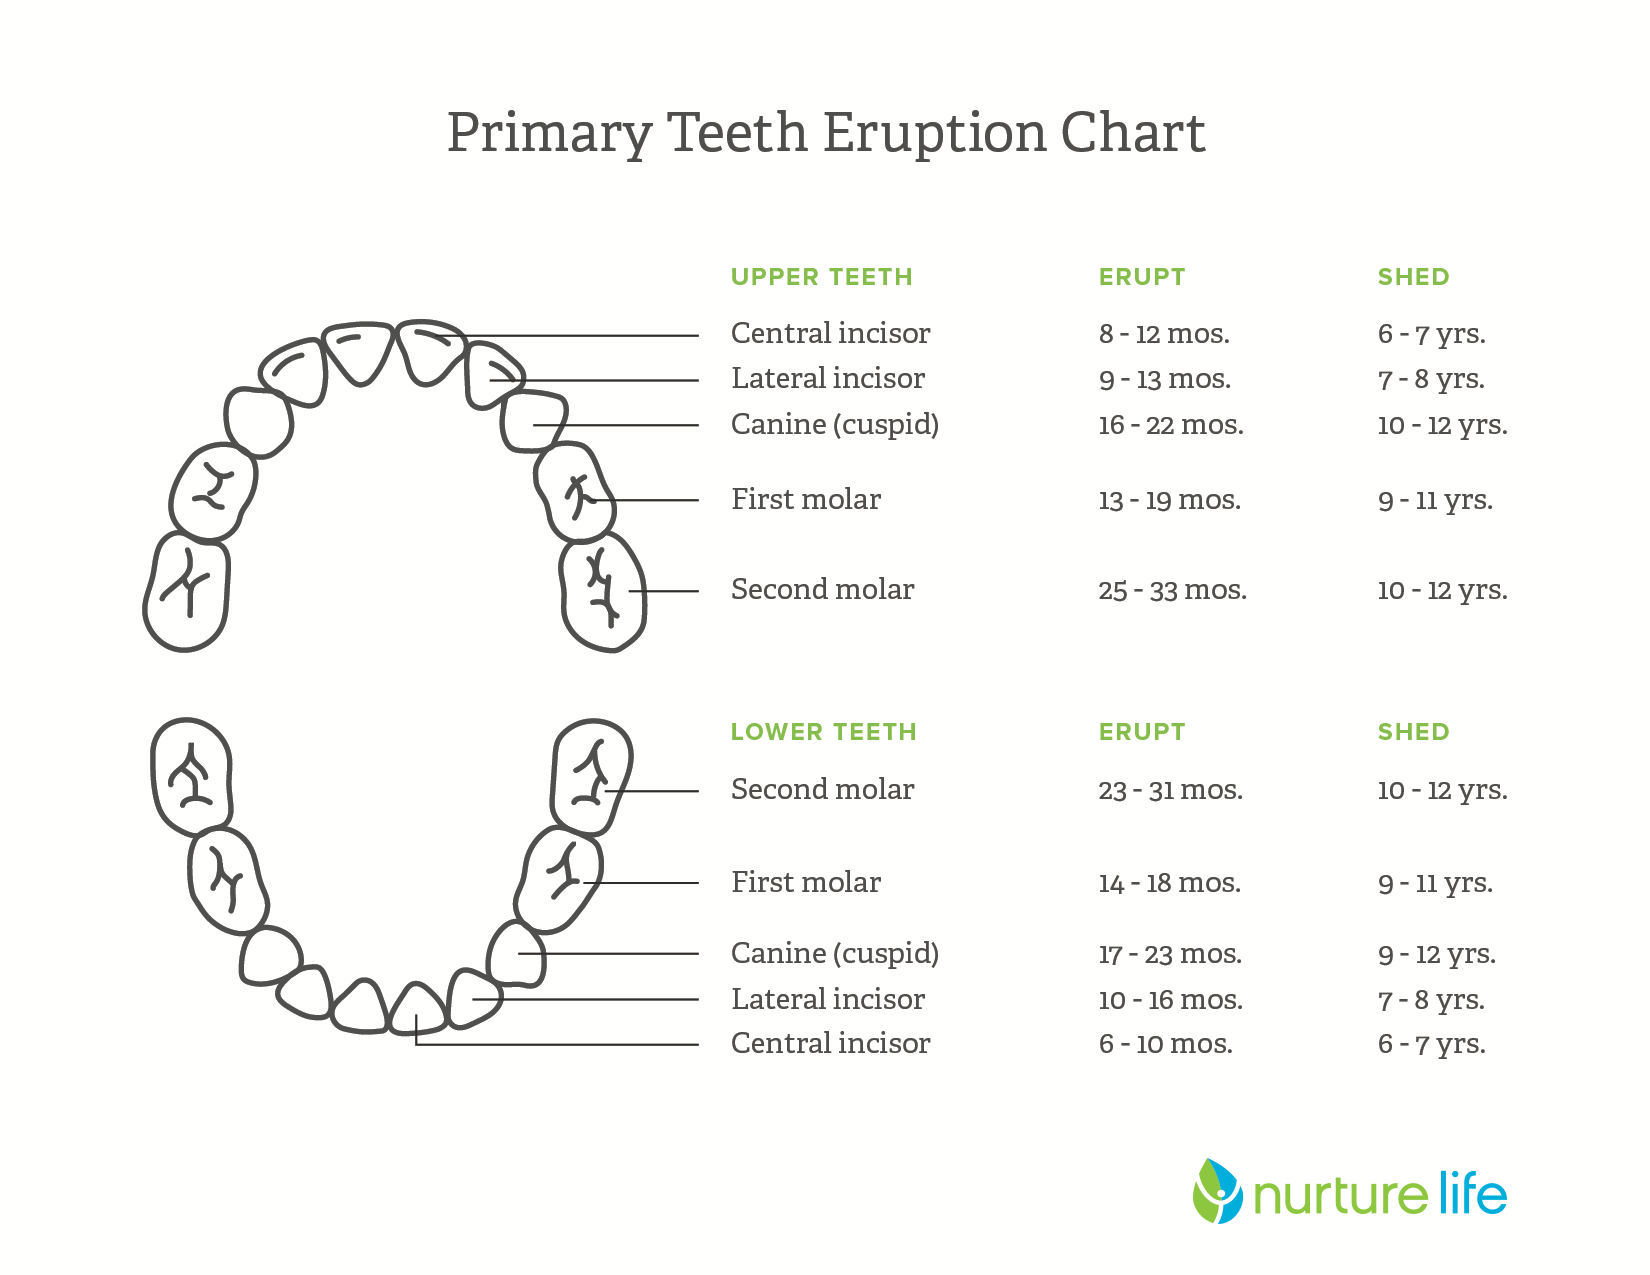 Toddler Teething: What to Expect - Nurture Life